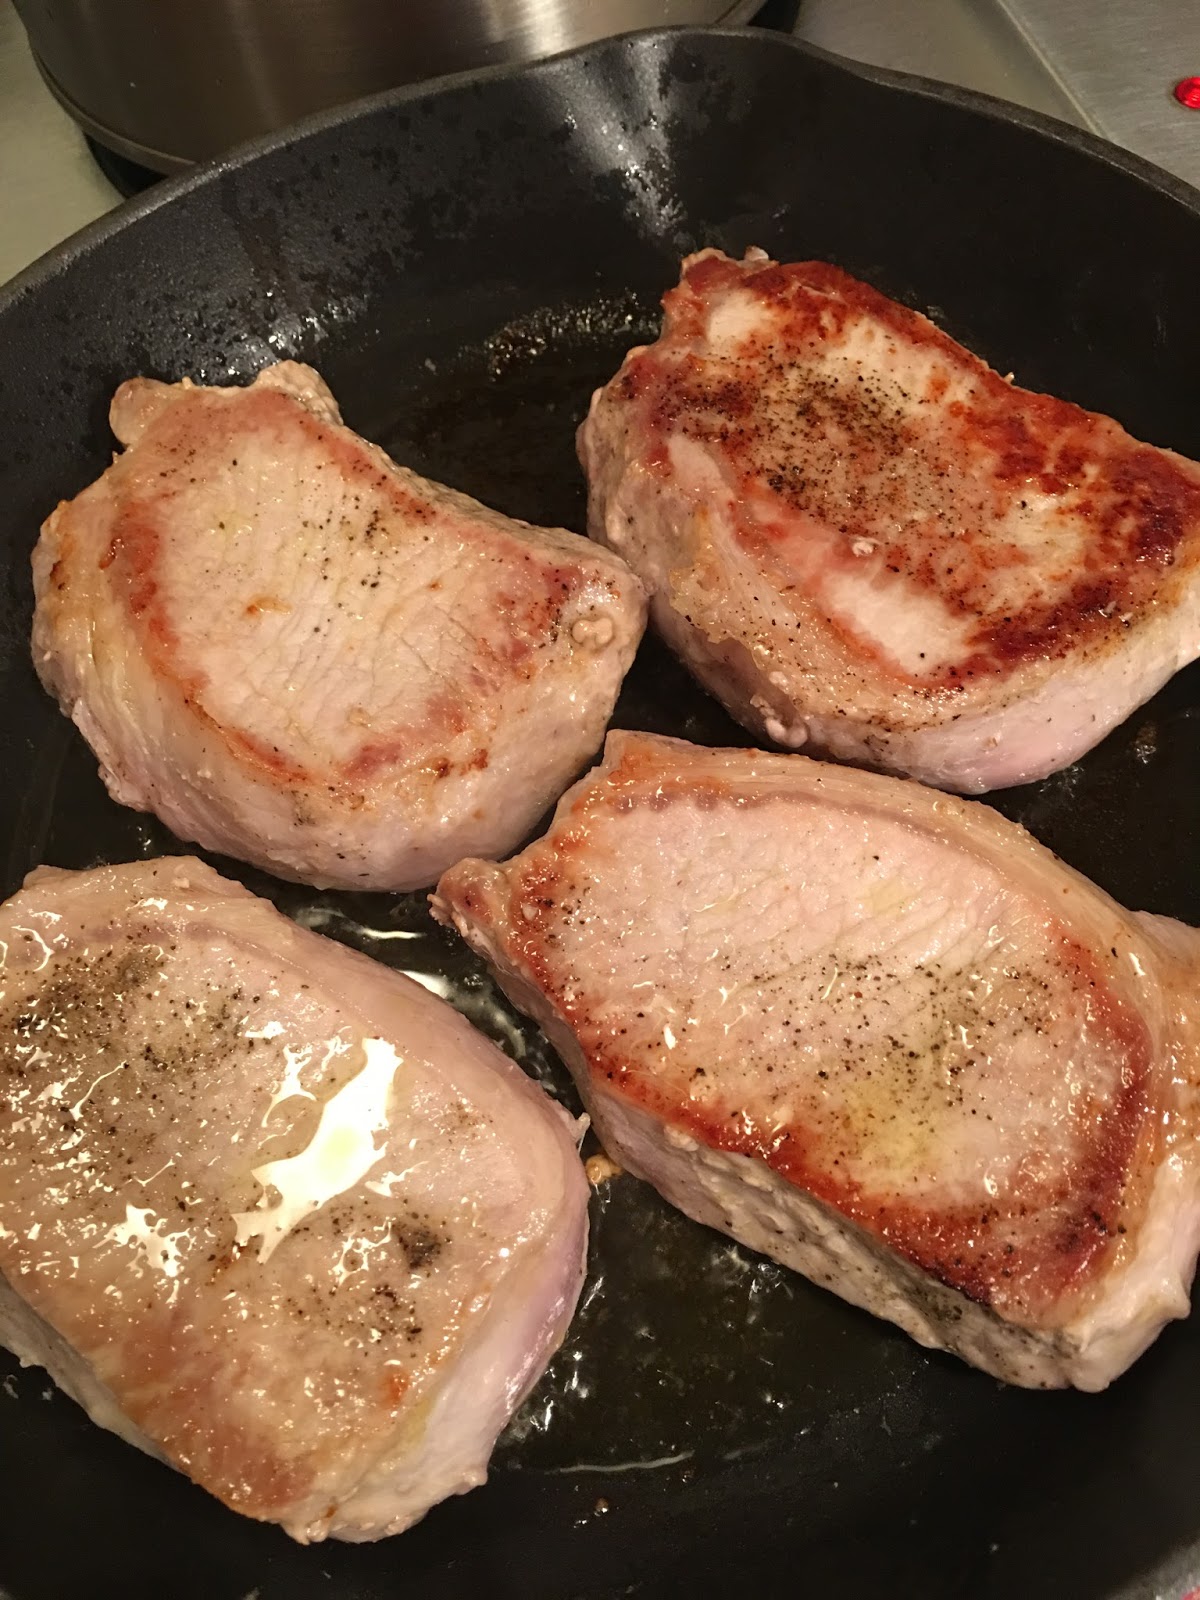 The Swedish Chef: Tomato Dijon Pork Chops with Capers